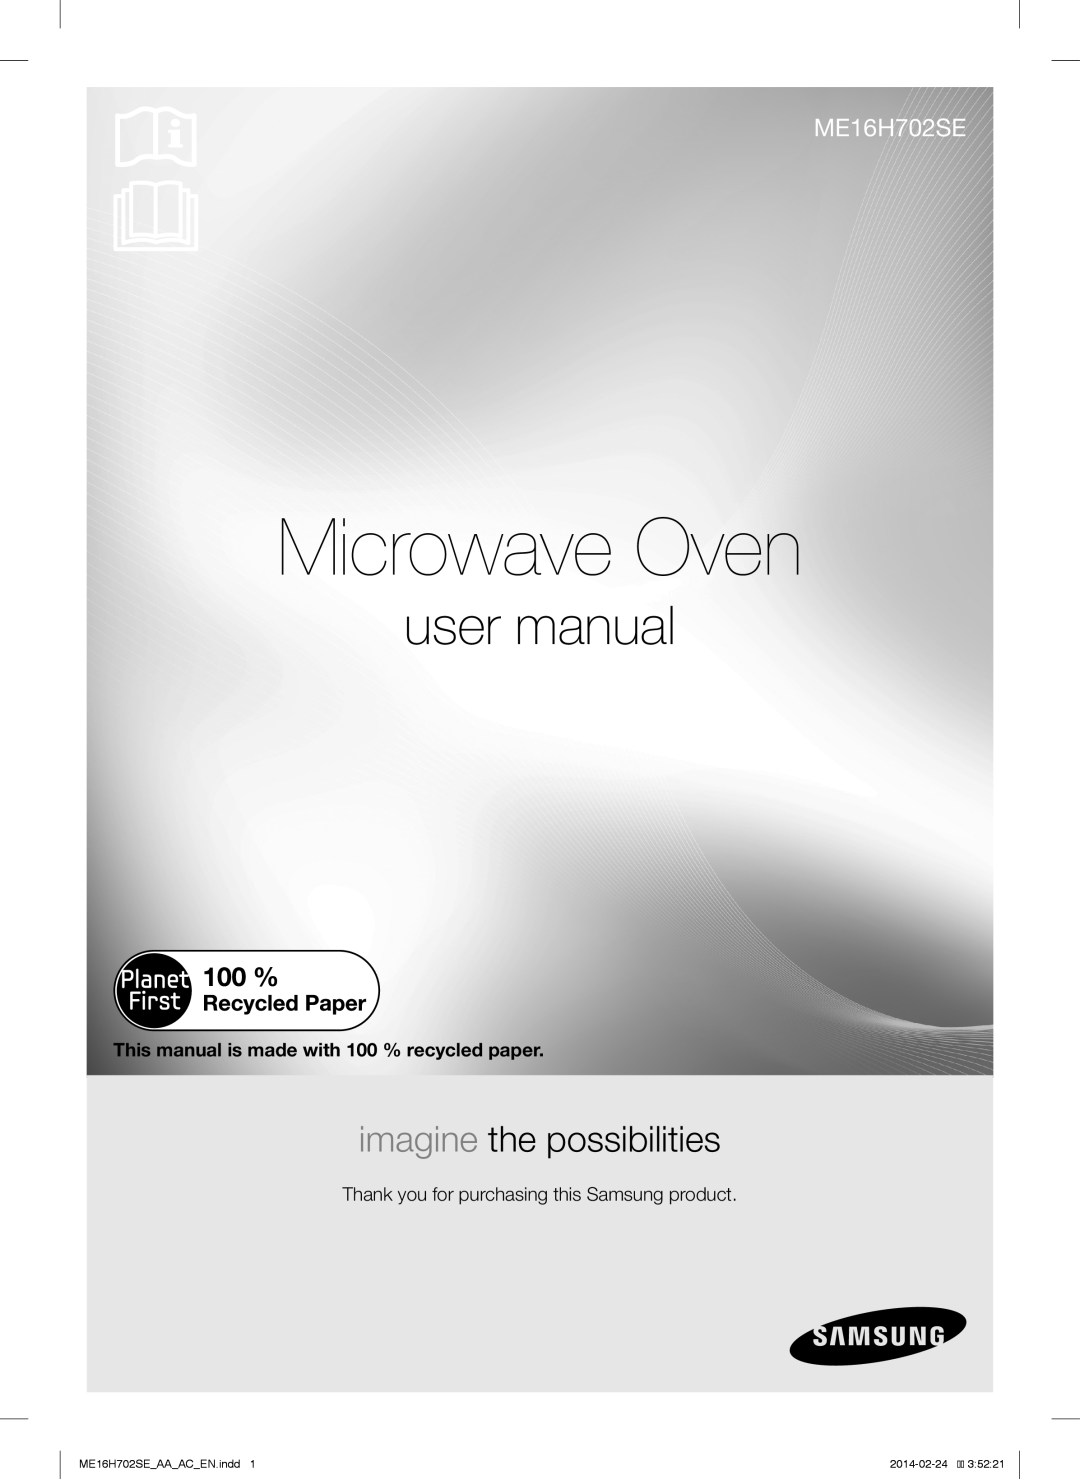 Samsung user manual Microwave Oven, imagine the possibilities, ME16H702SE AA AC EN.indd, 2014-02-24 